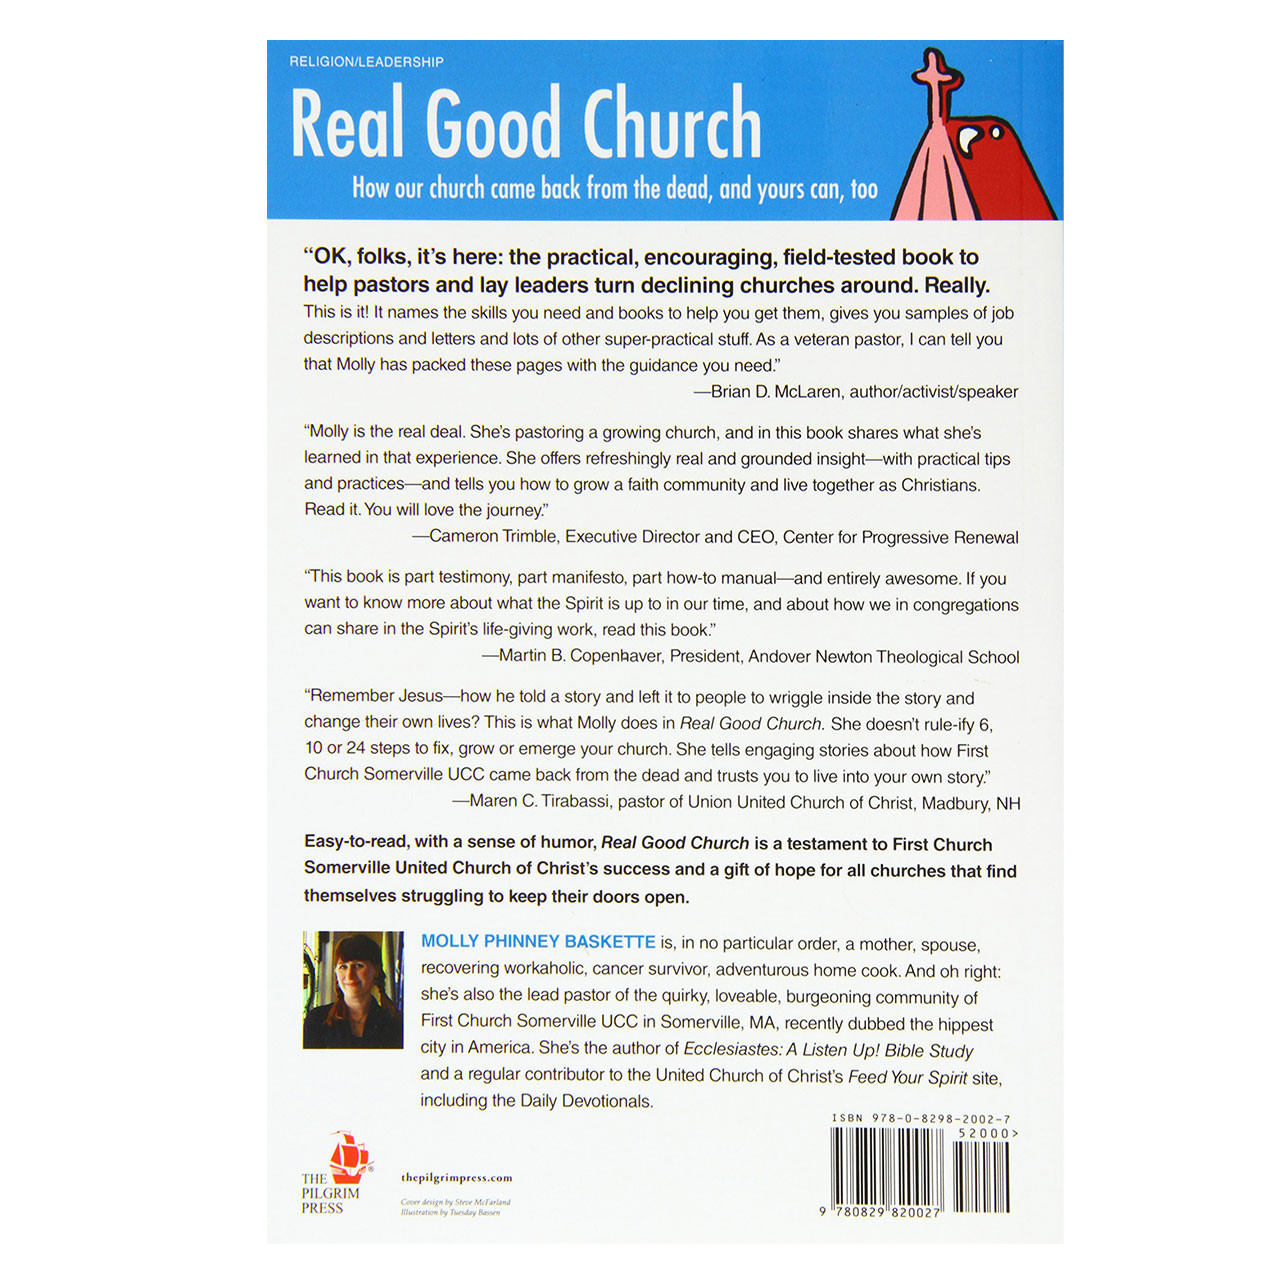 Back cover of the Real Good Church Book by Rev. Molly Phinney Baskette